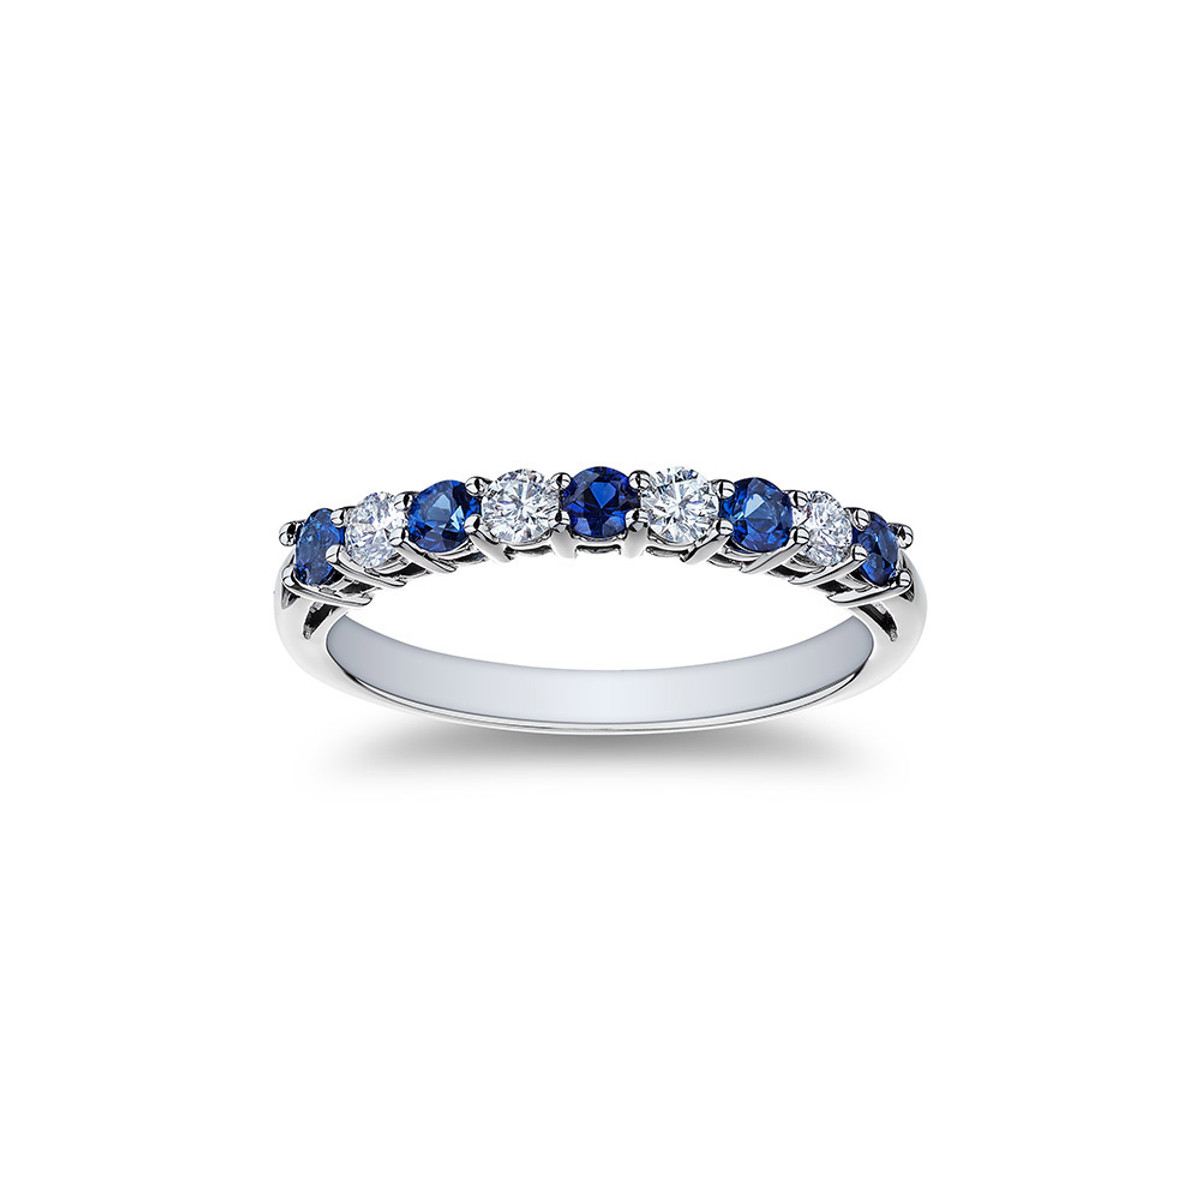 Hyde Park Collection Platinum Diamond and Sapphire Band-43307 Product Image